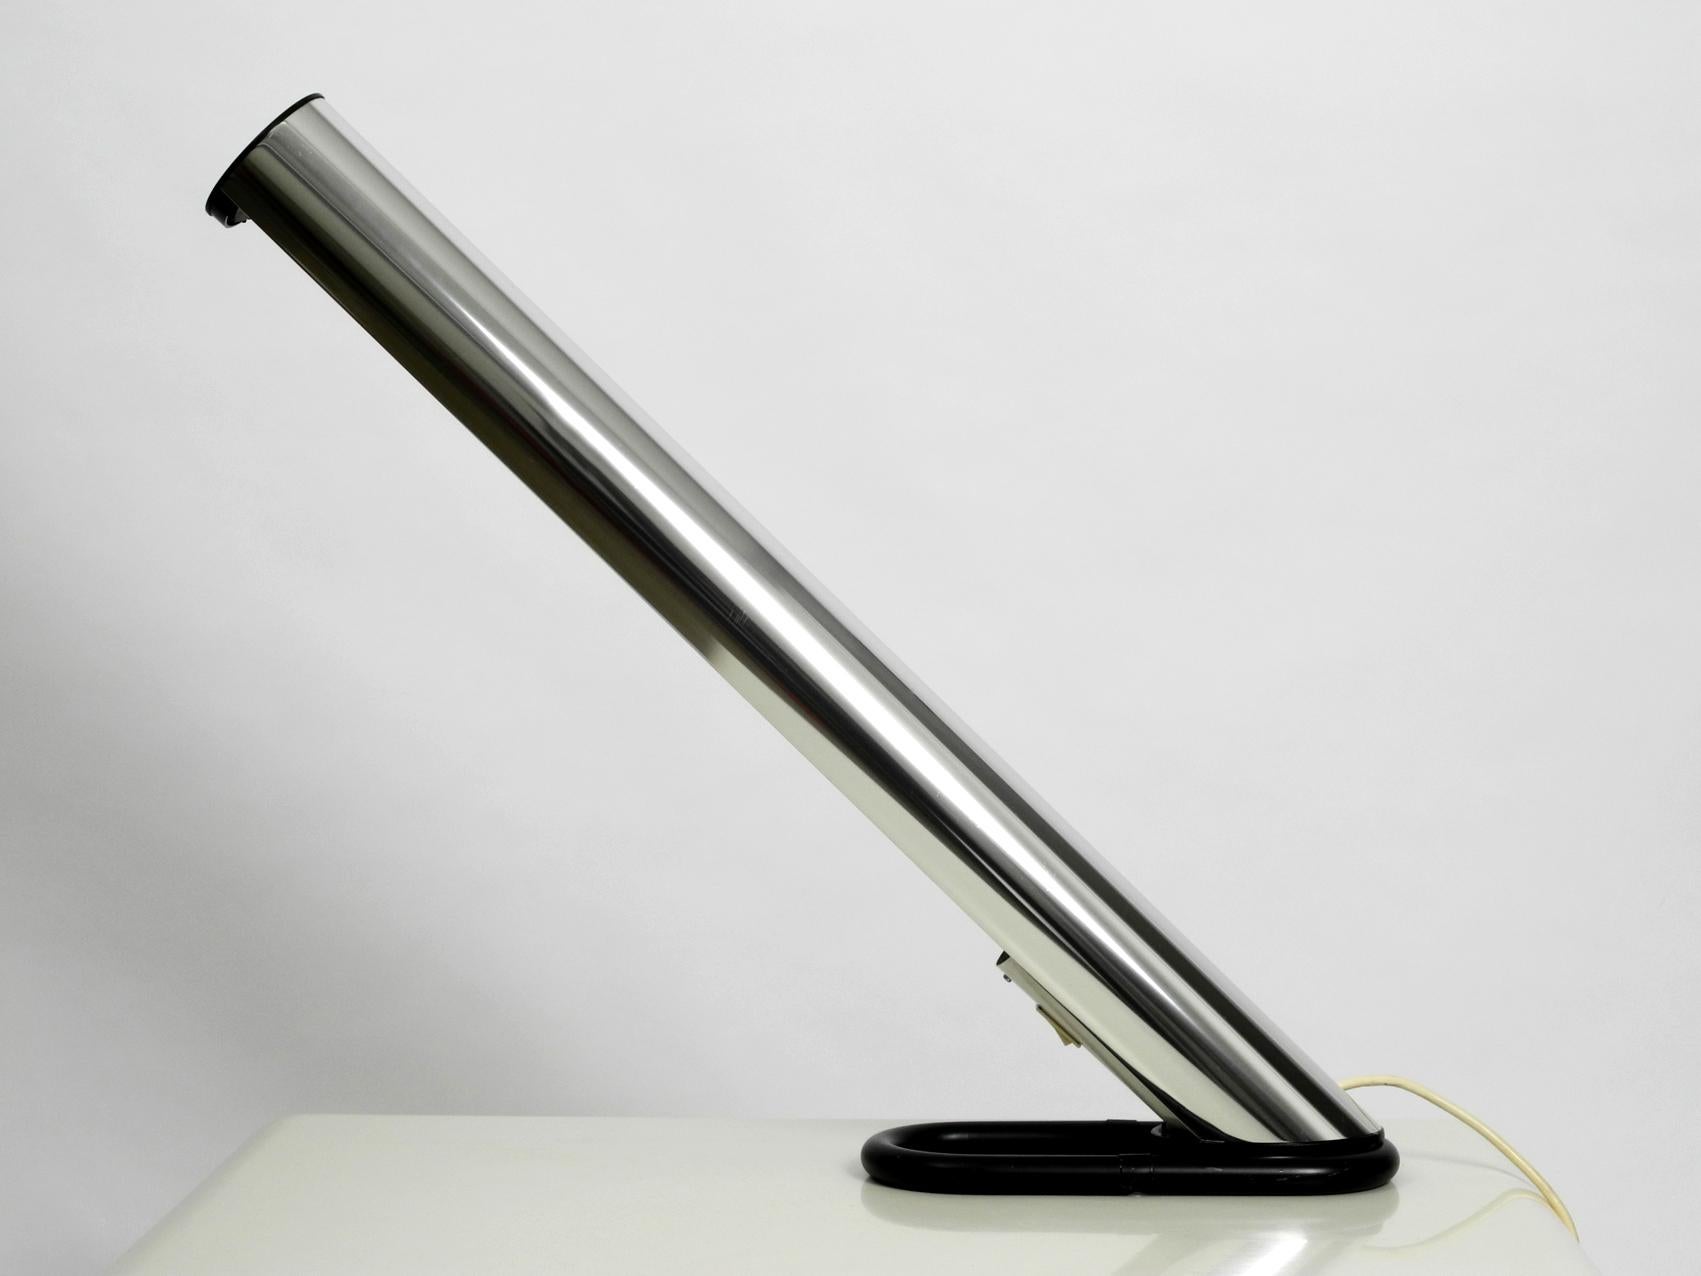 Very rare 1970s XXL Rocket table lamp by Göran Pehrson for Ateljé Lyktan Ahus. Made in Sweden futuristic minimalistic space age design from the 1970s. Shade is made of chrome-plated aluminum. Foot is made of heavy iron. Well maintained vintage